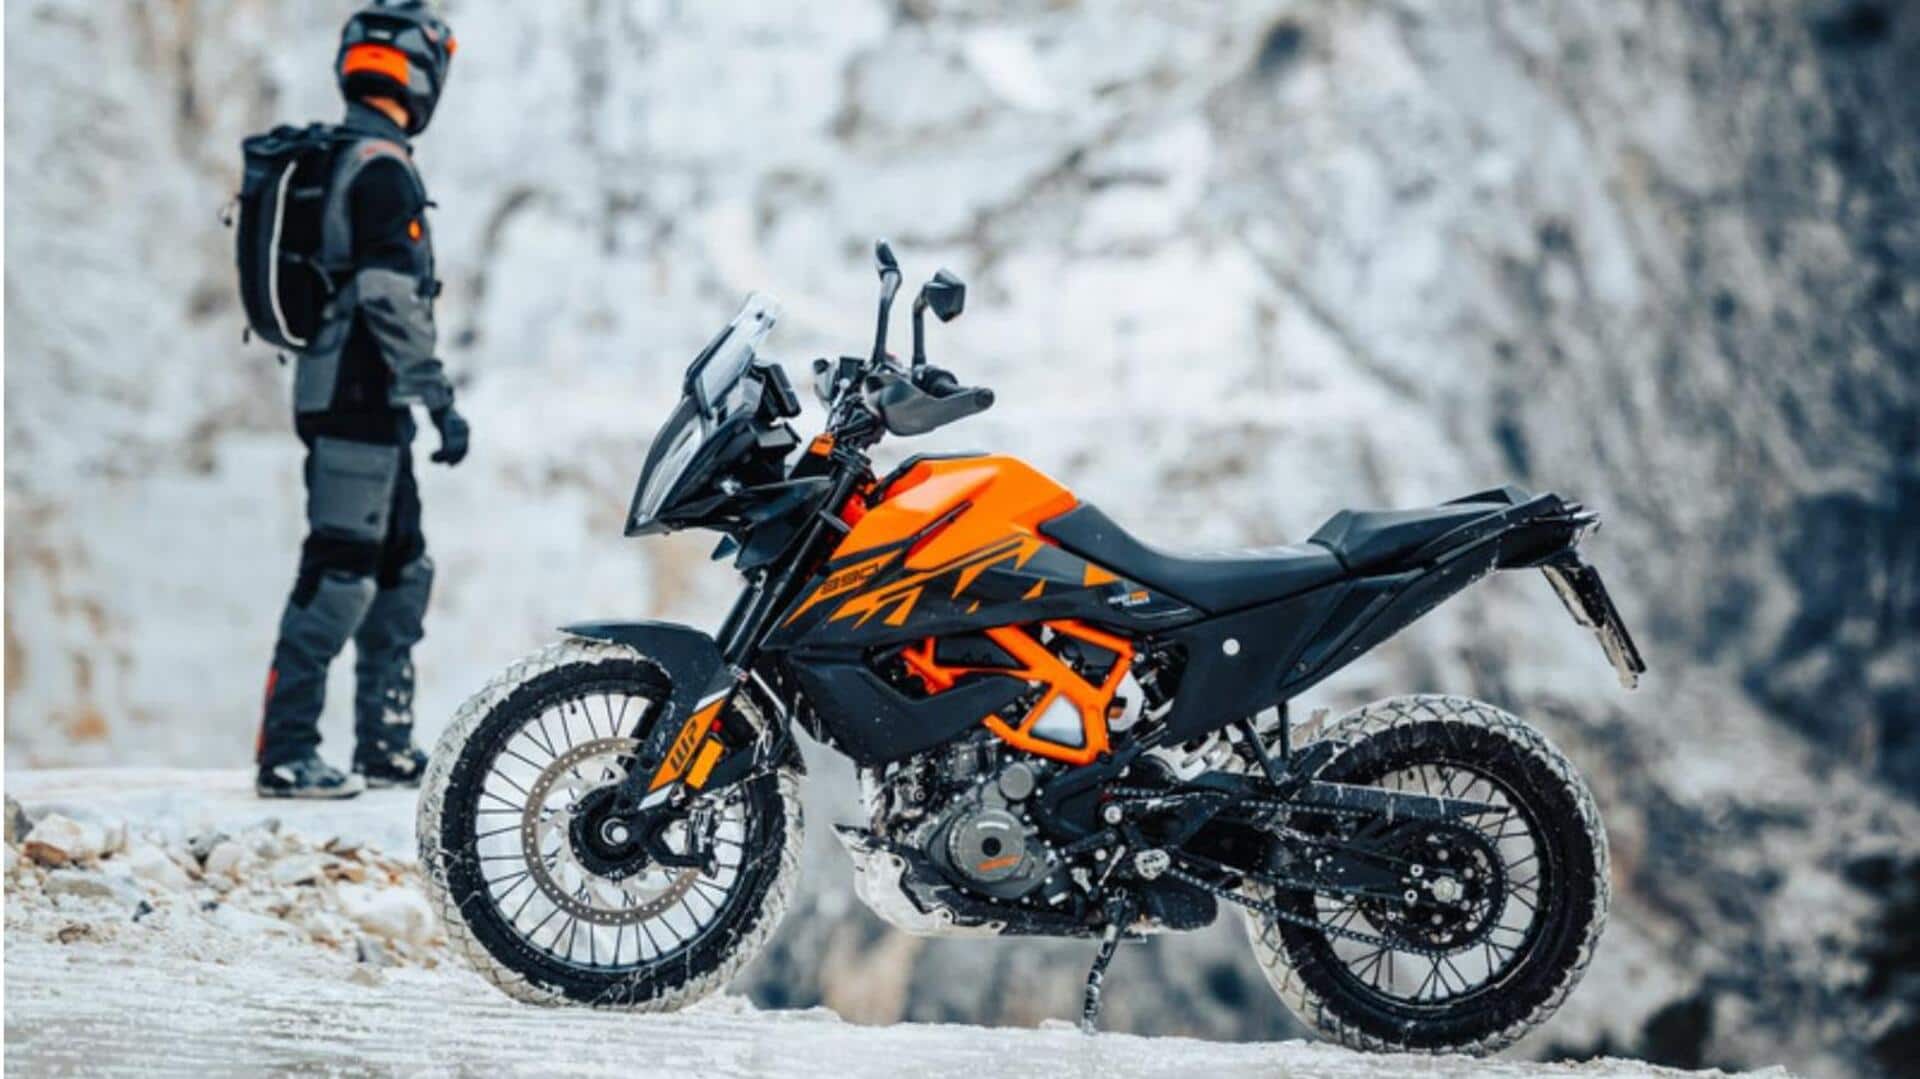 New KTM 390 Adventure spotted in production-spec guise: Check features